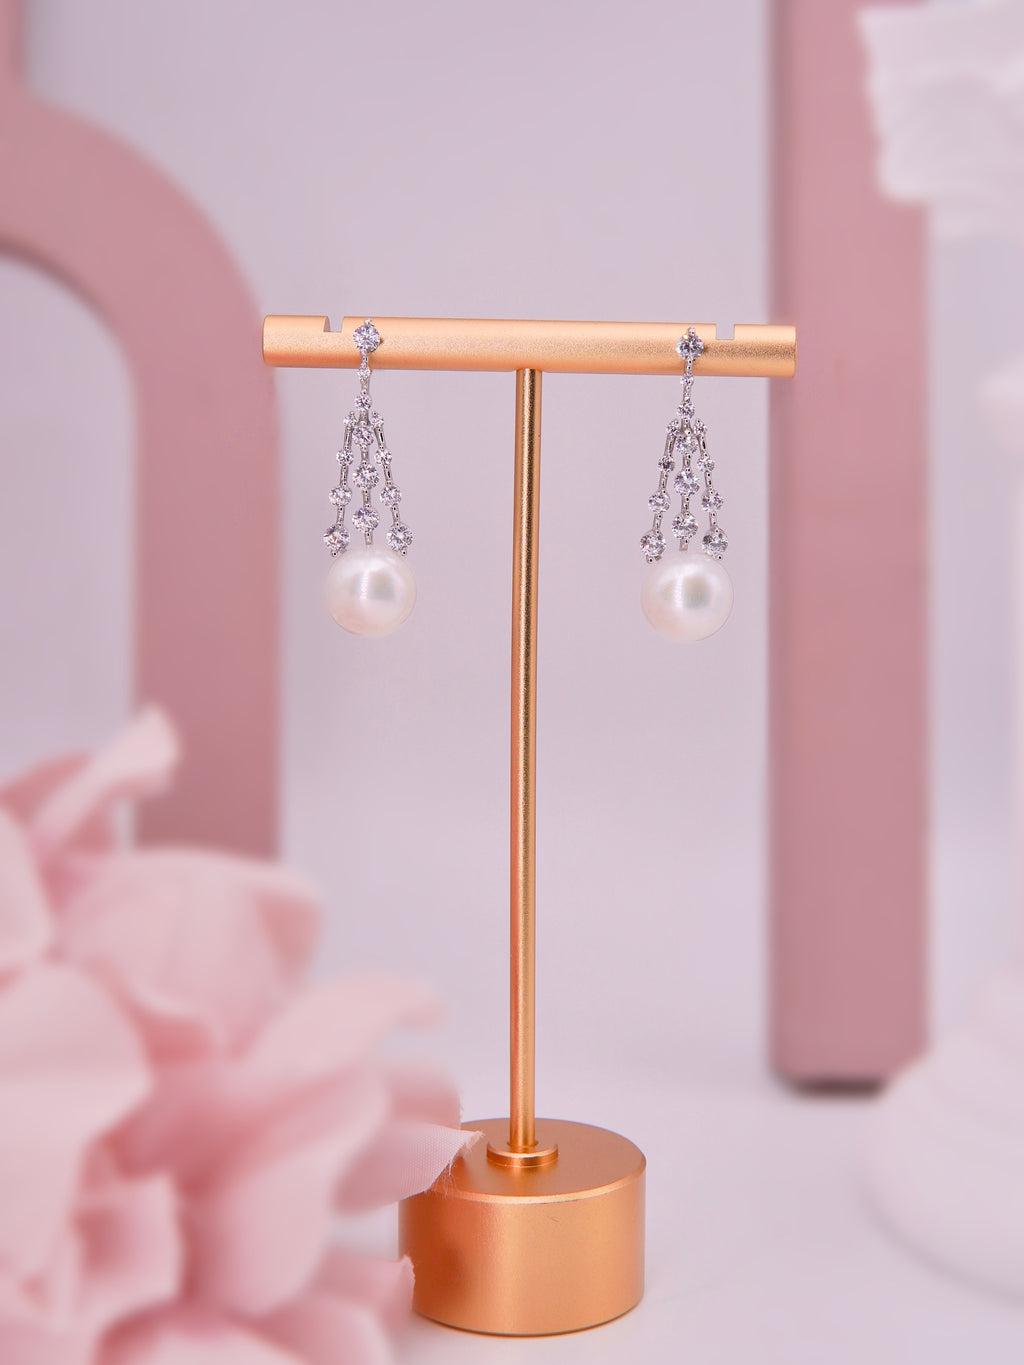 LAFIT· Pearly Drops - Earrings 奢華氣質珍珠耳環